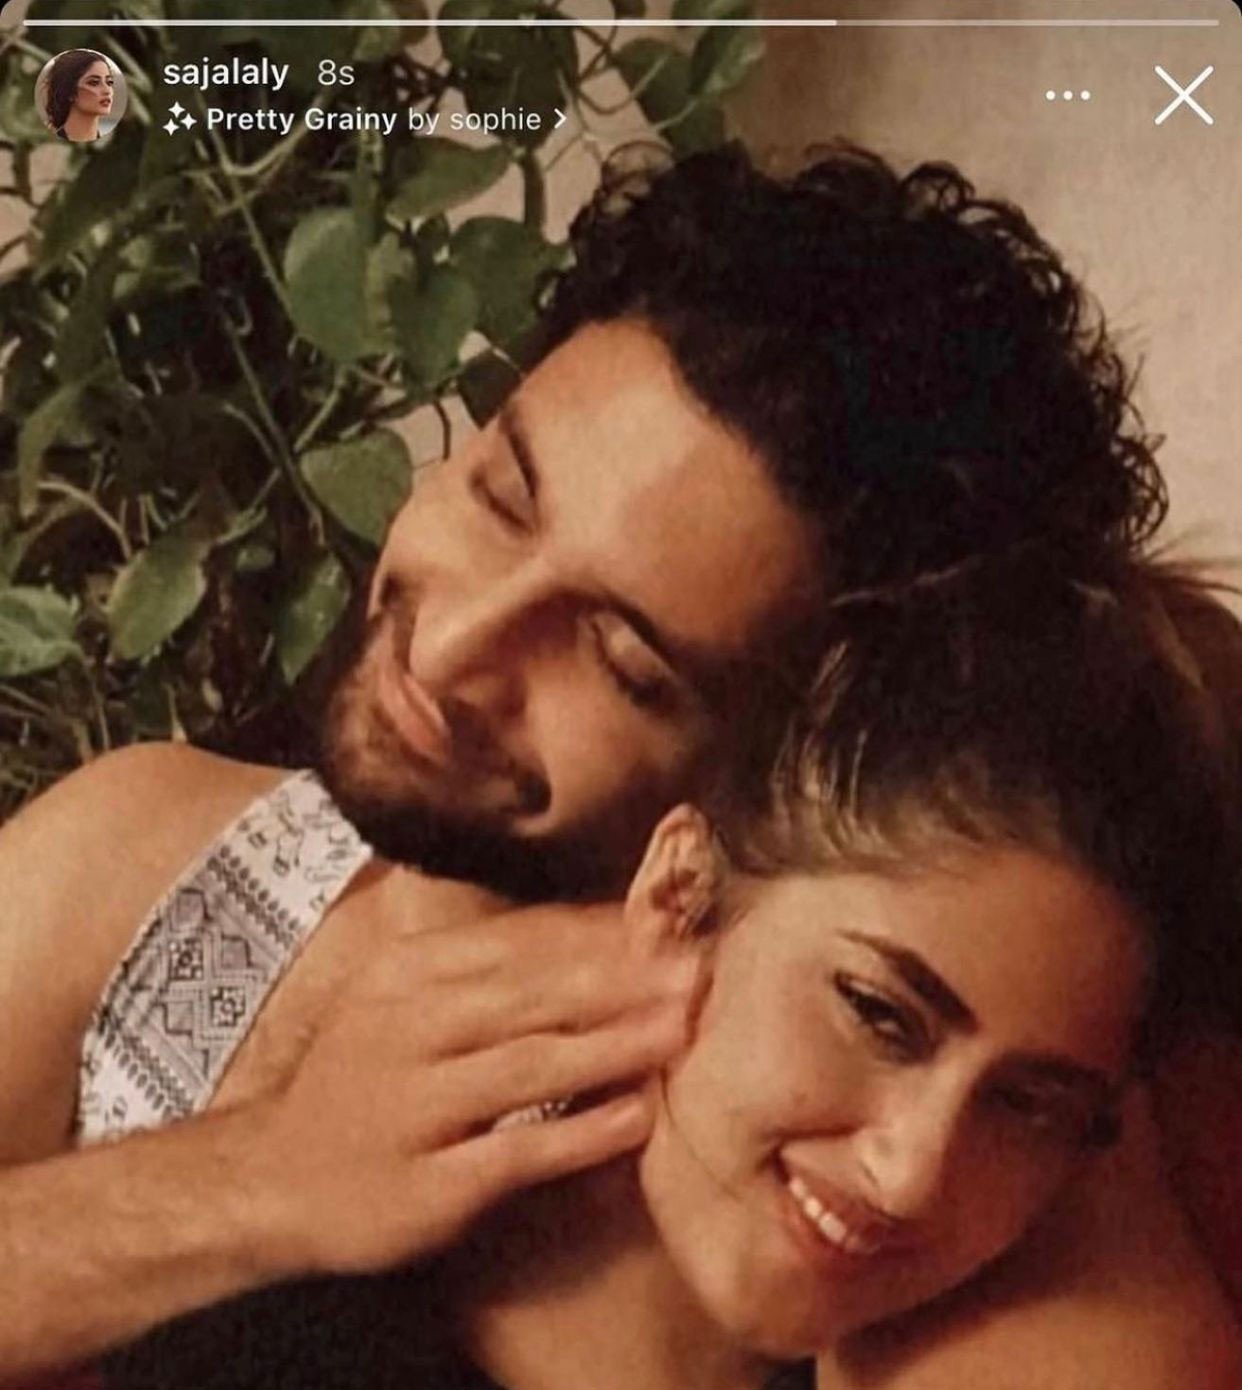 Refuting rumors? Sajal posts a picture with Ahad, later deletes it